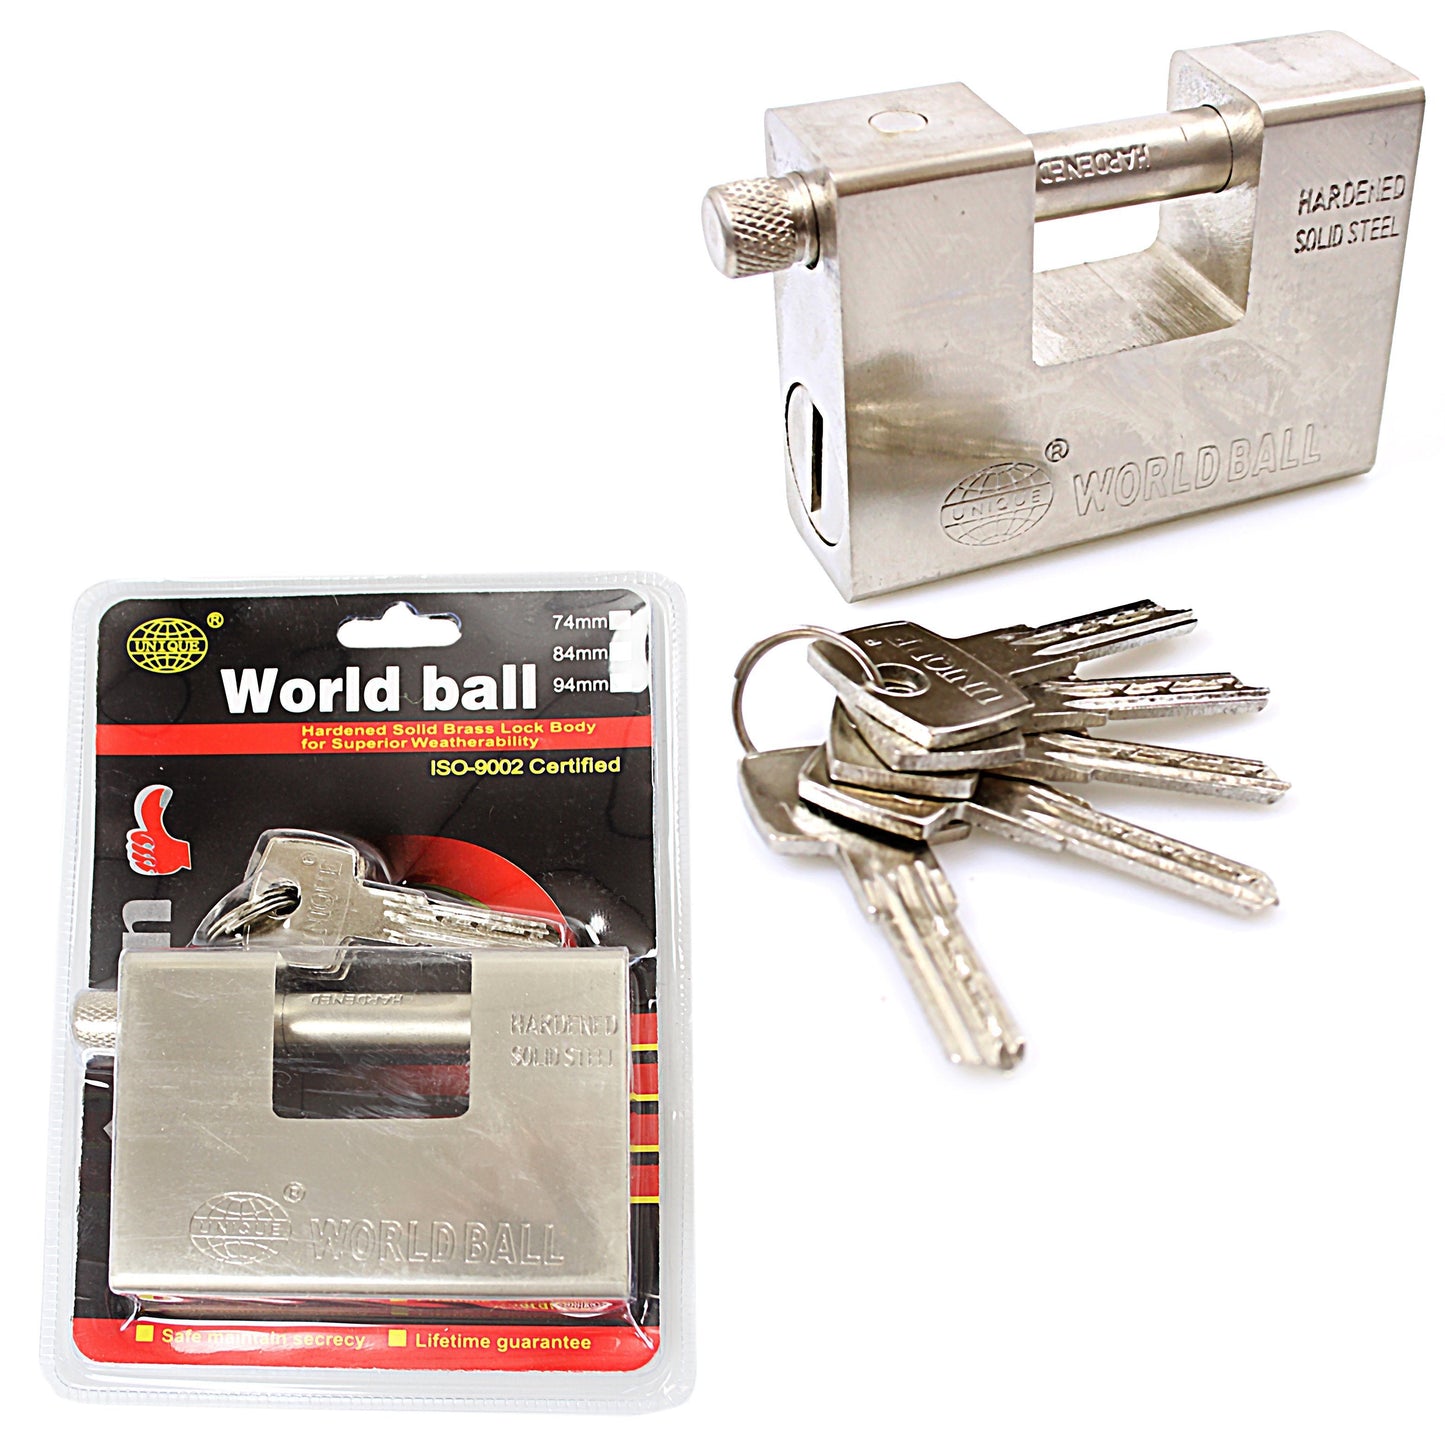 Security DIY World Ball Lock With Keys Included 94mm 0253 (Parcel Rate)